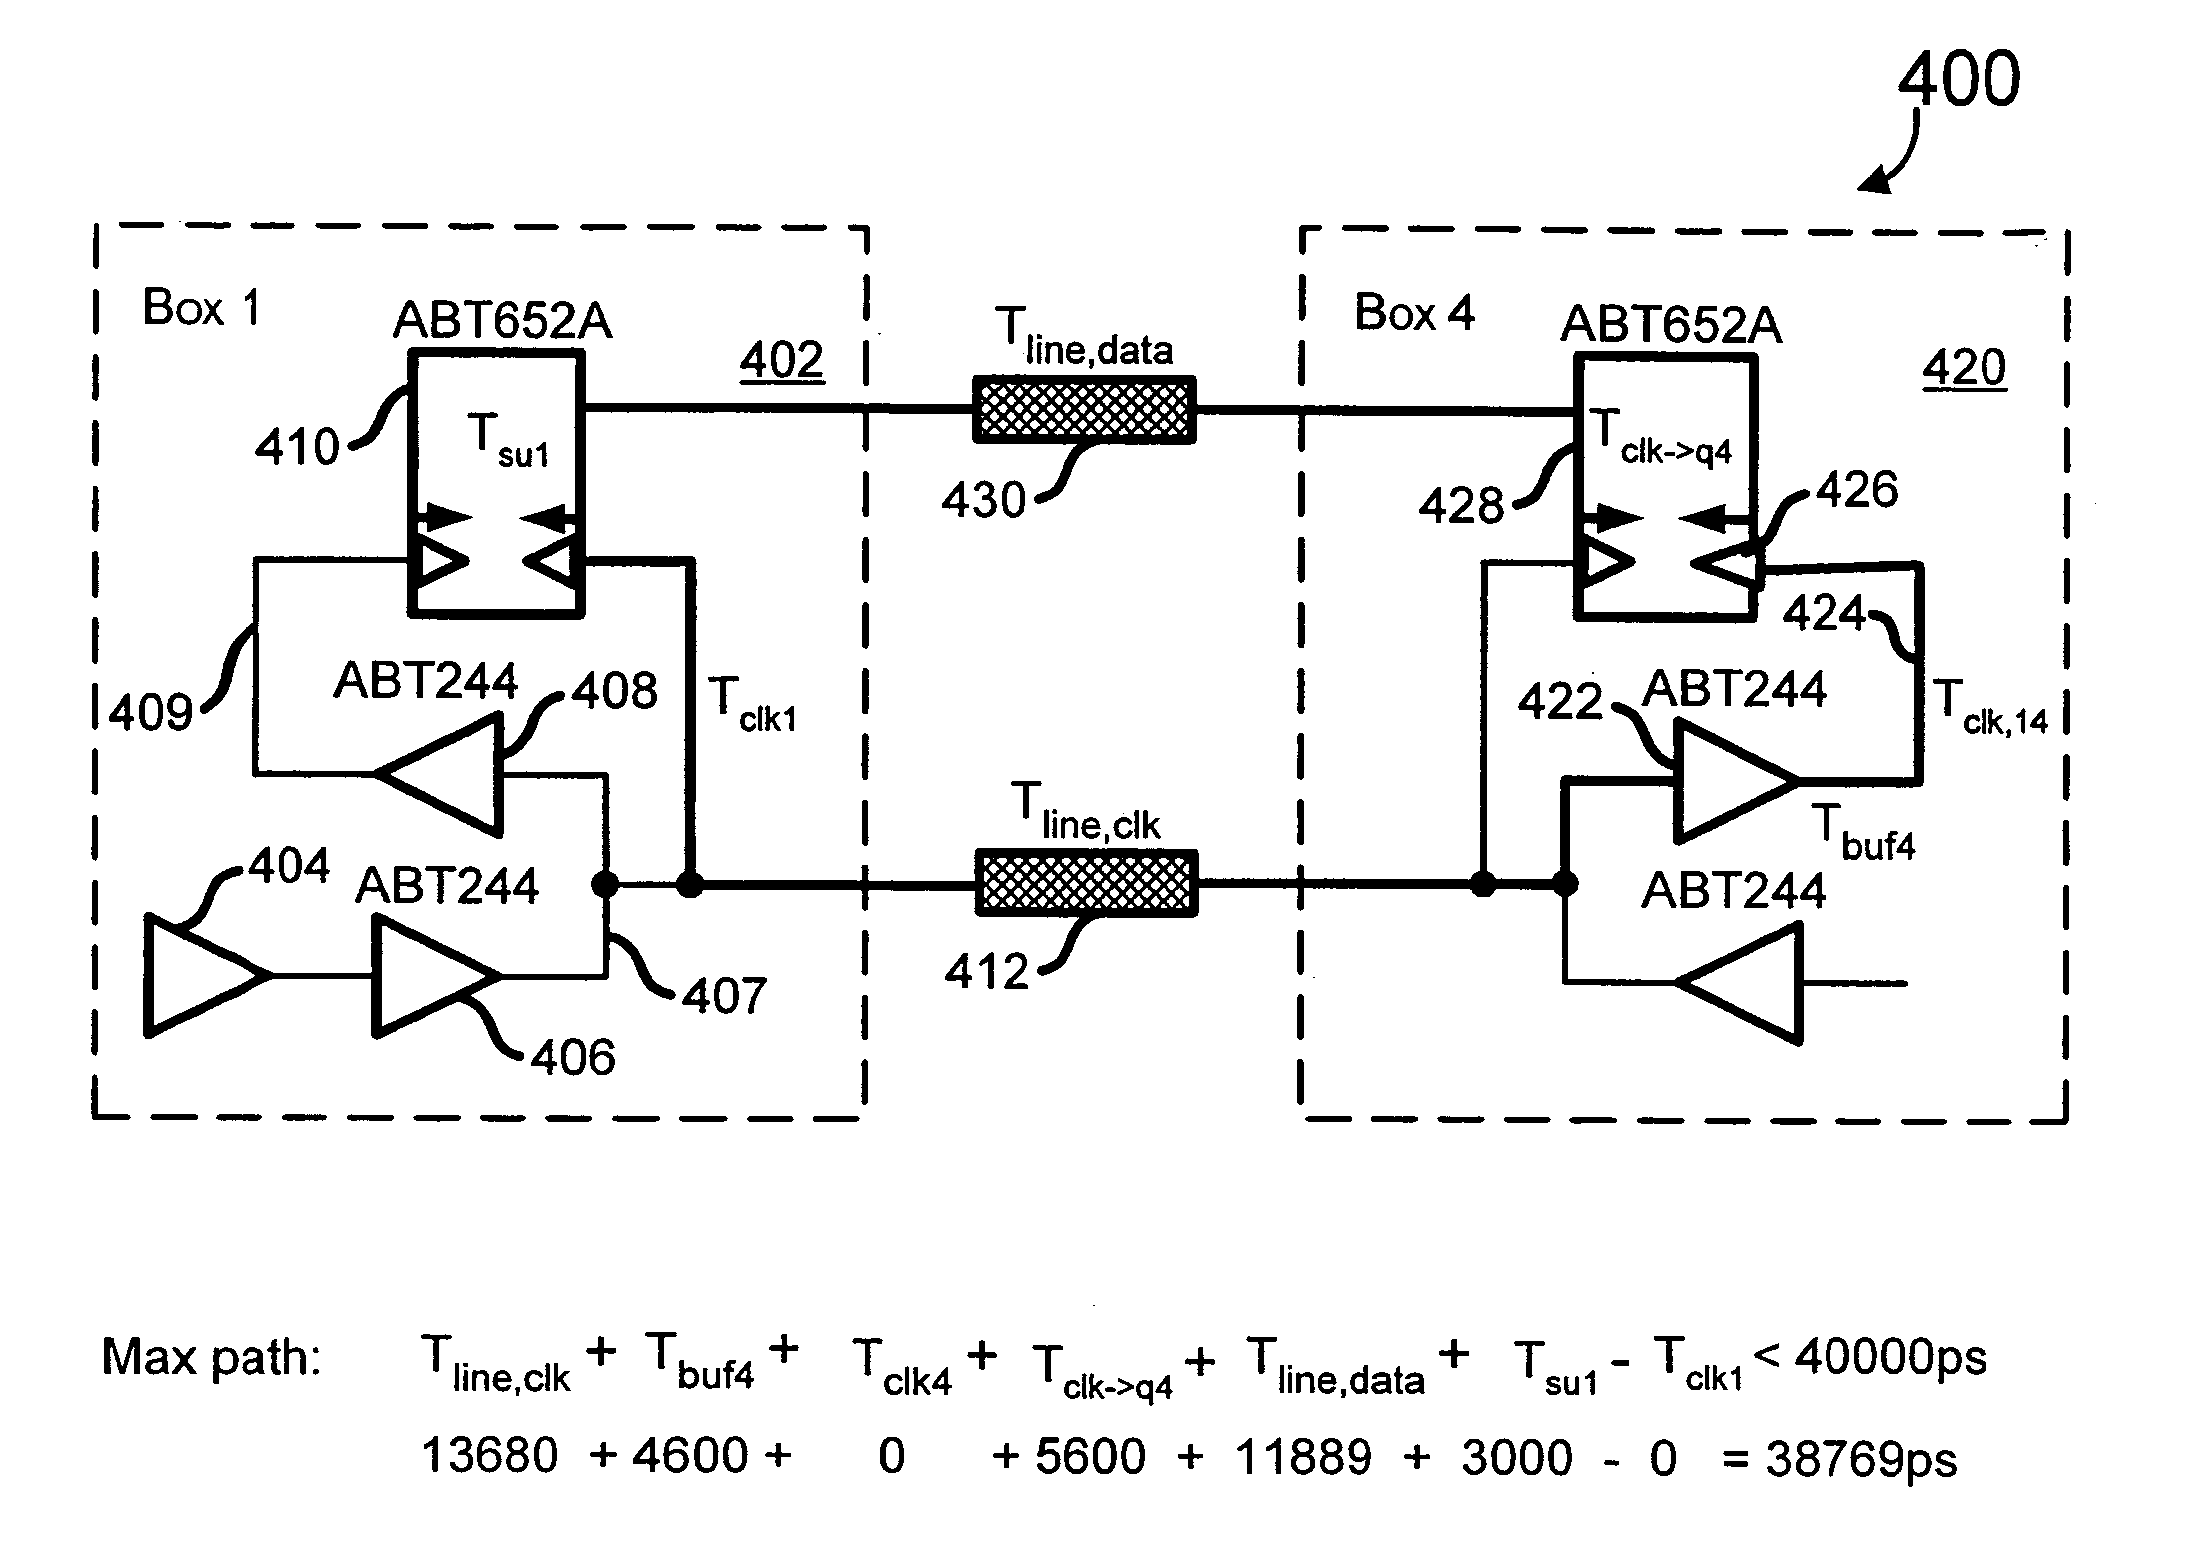 Synchronous stack bus for fast ethernet repeater